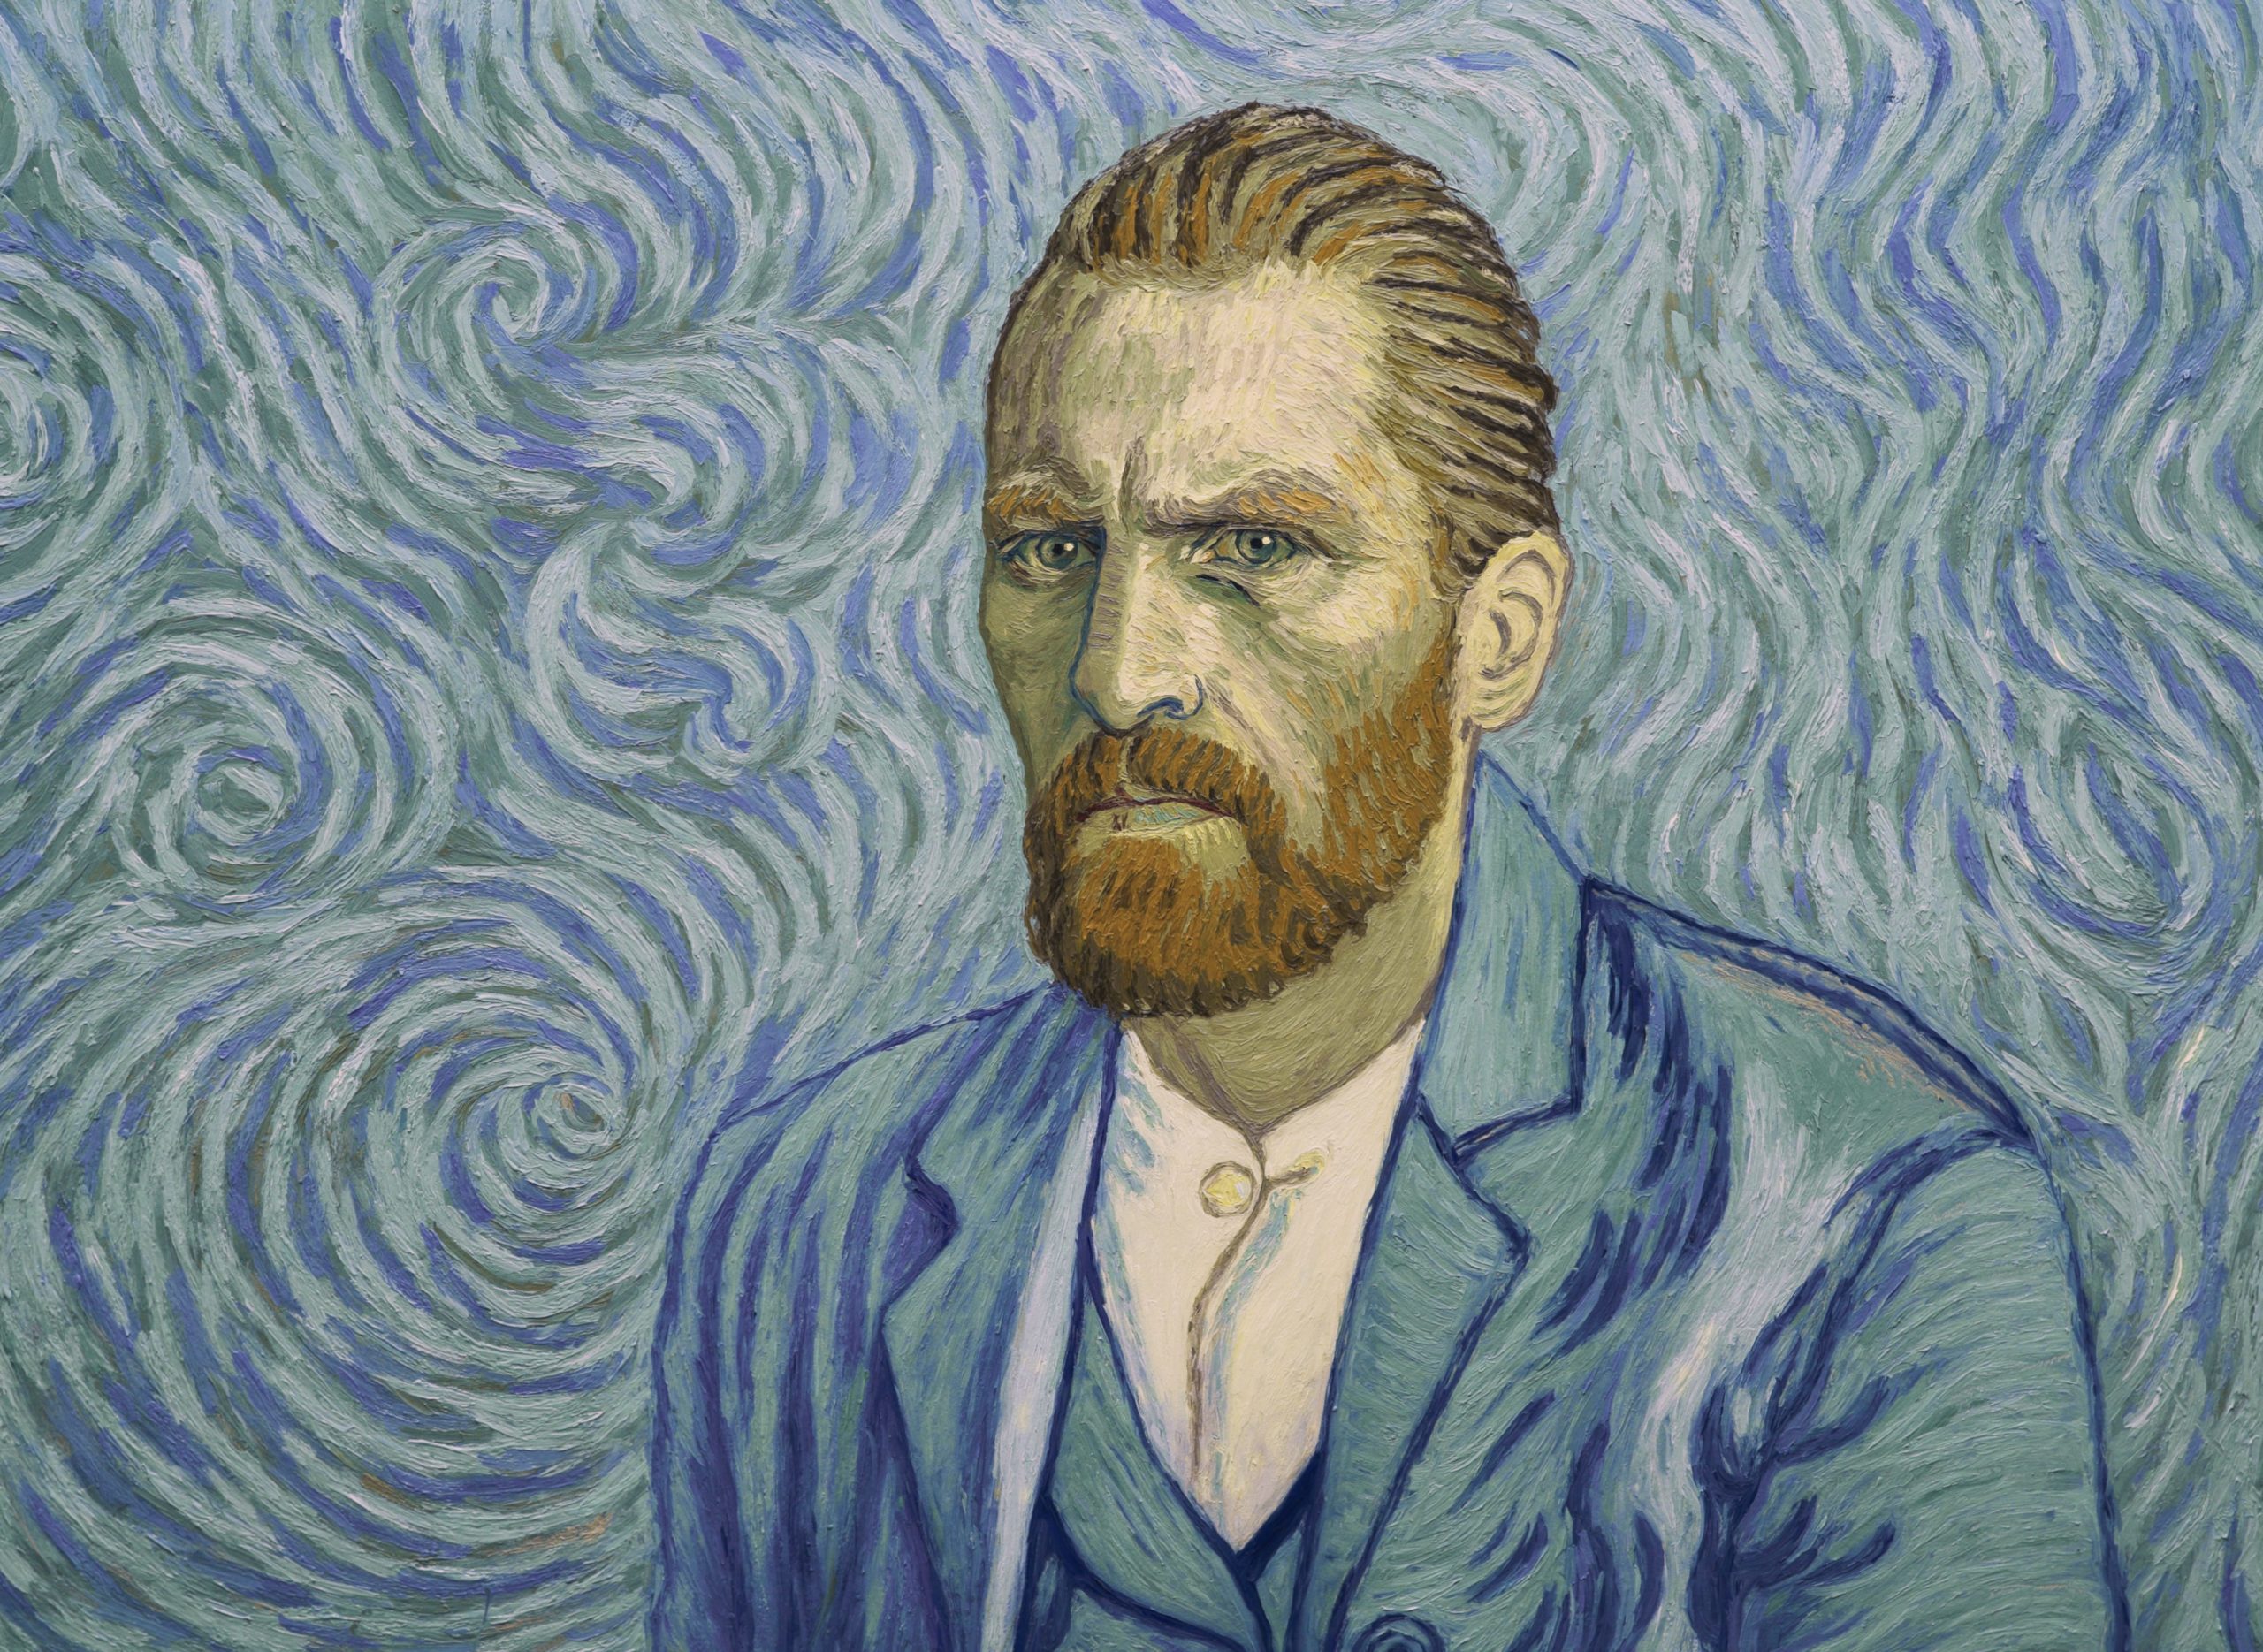 "Loving Vincent" will be performed at the North Star Theatre on February 24.